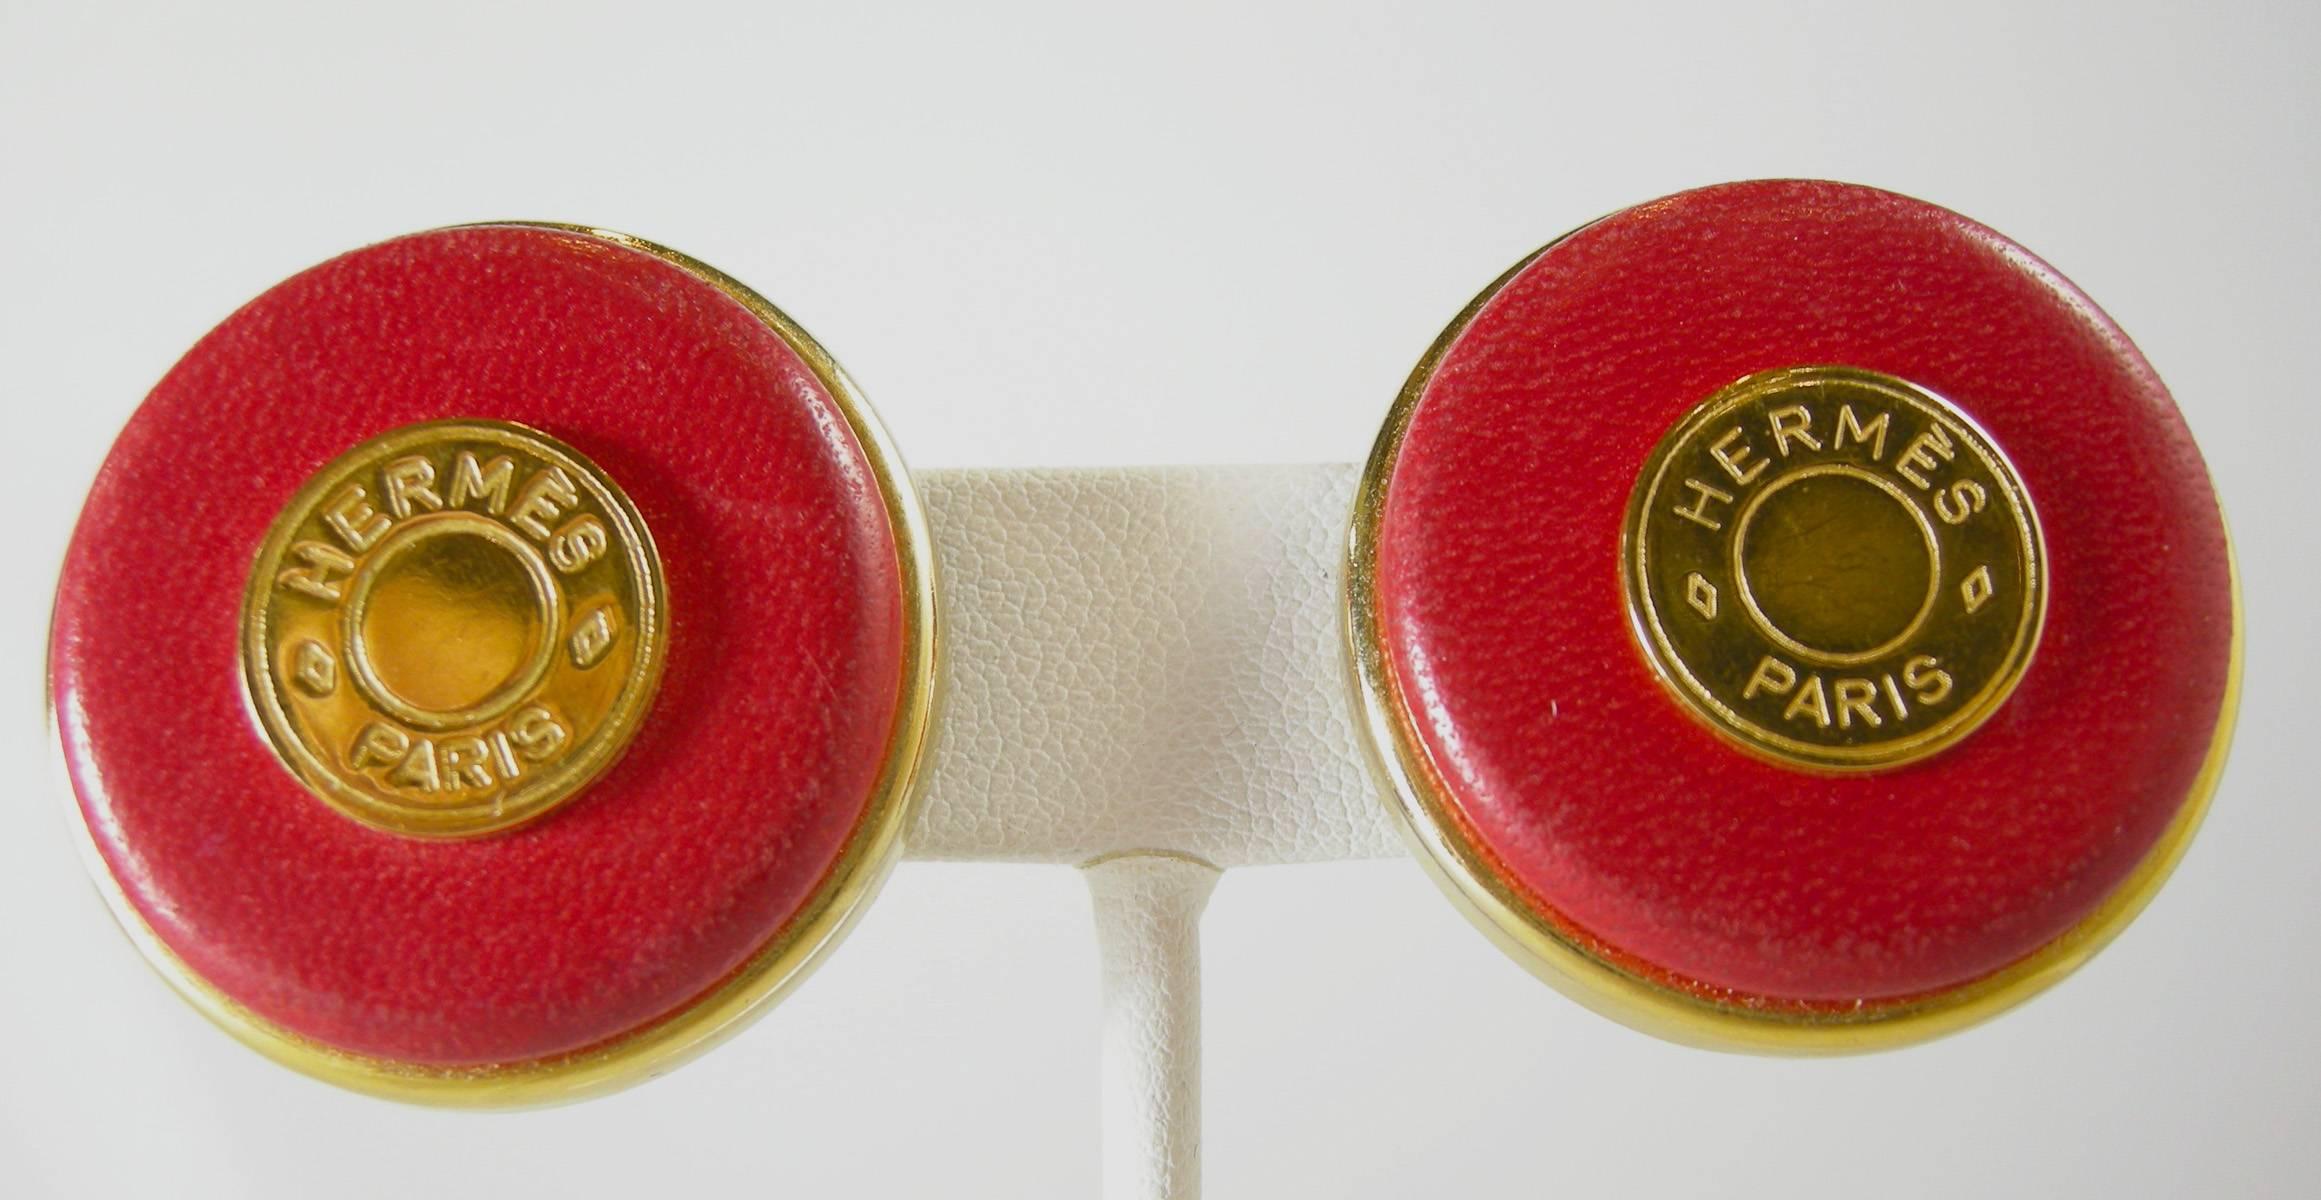 Gorgeous Hermes earrings feature a dark coral lucite disc design accented by a disc signed  “HERMES PARIS”.  In excellent condition, these clip earrings measure 1.5